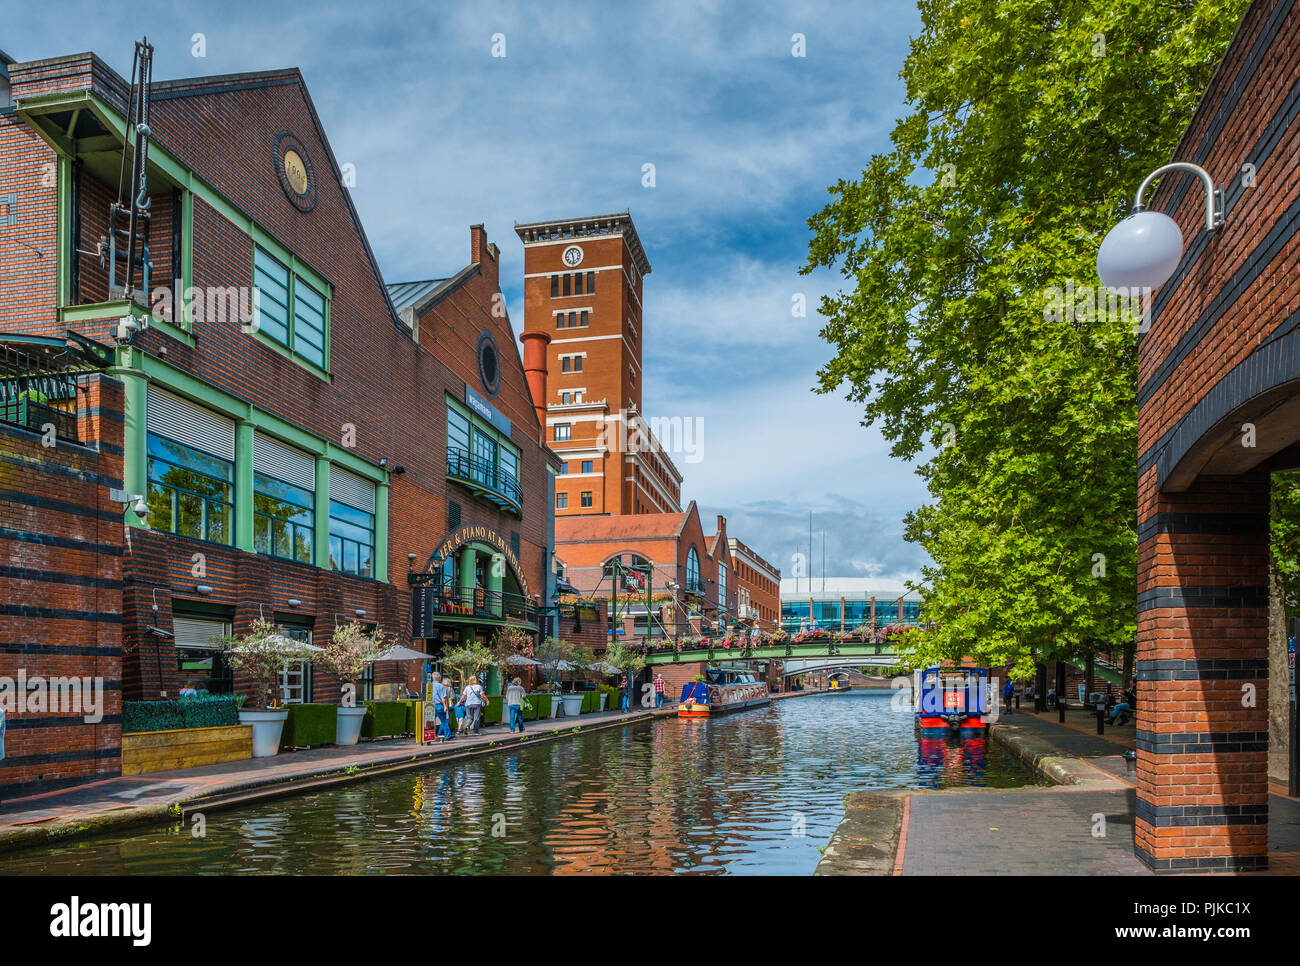 Brindley Place in central Birmingham. Stock Photo